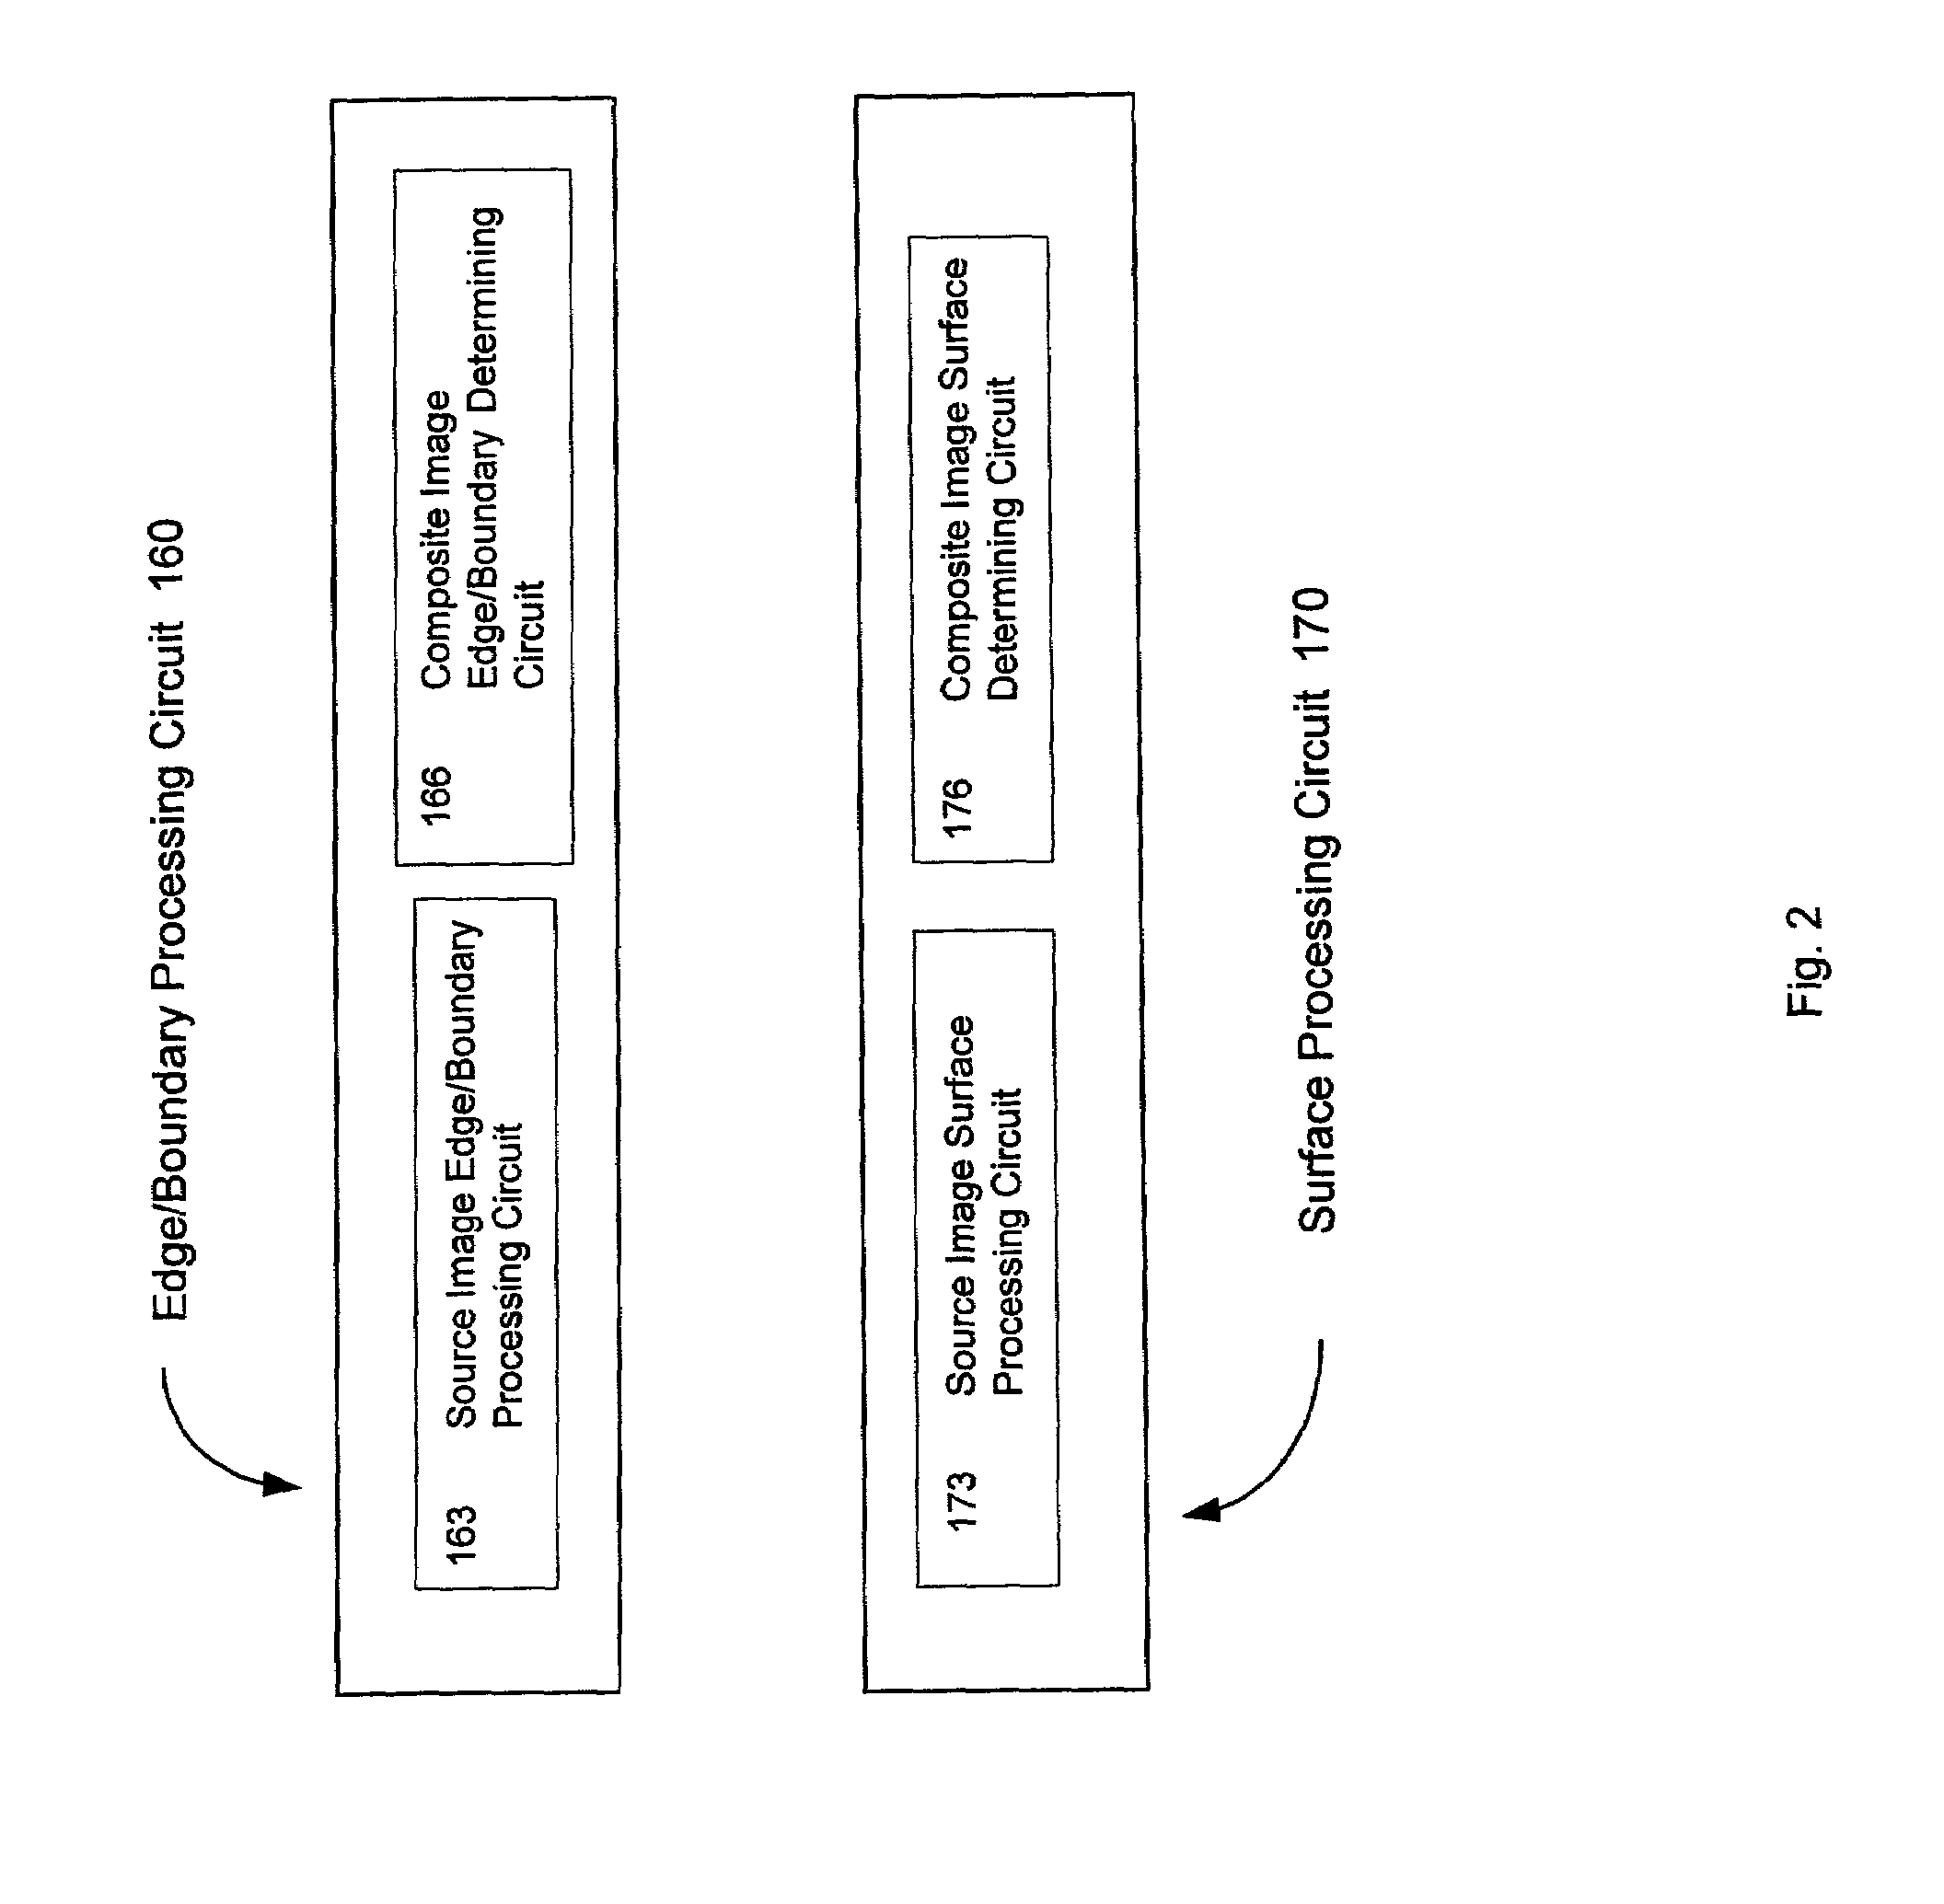 Systems and methods for constructing an image having an extended depth of field